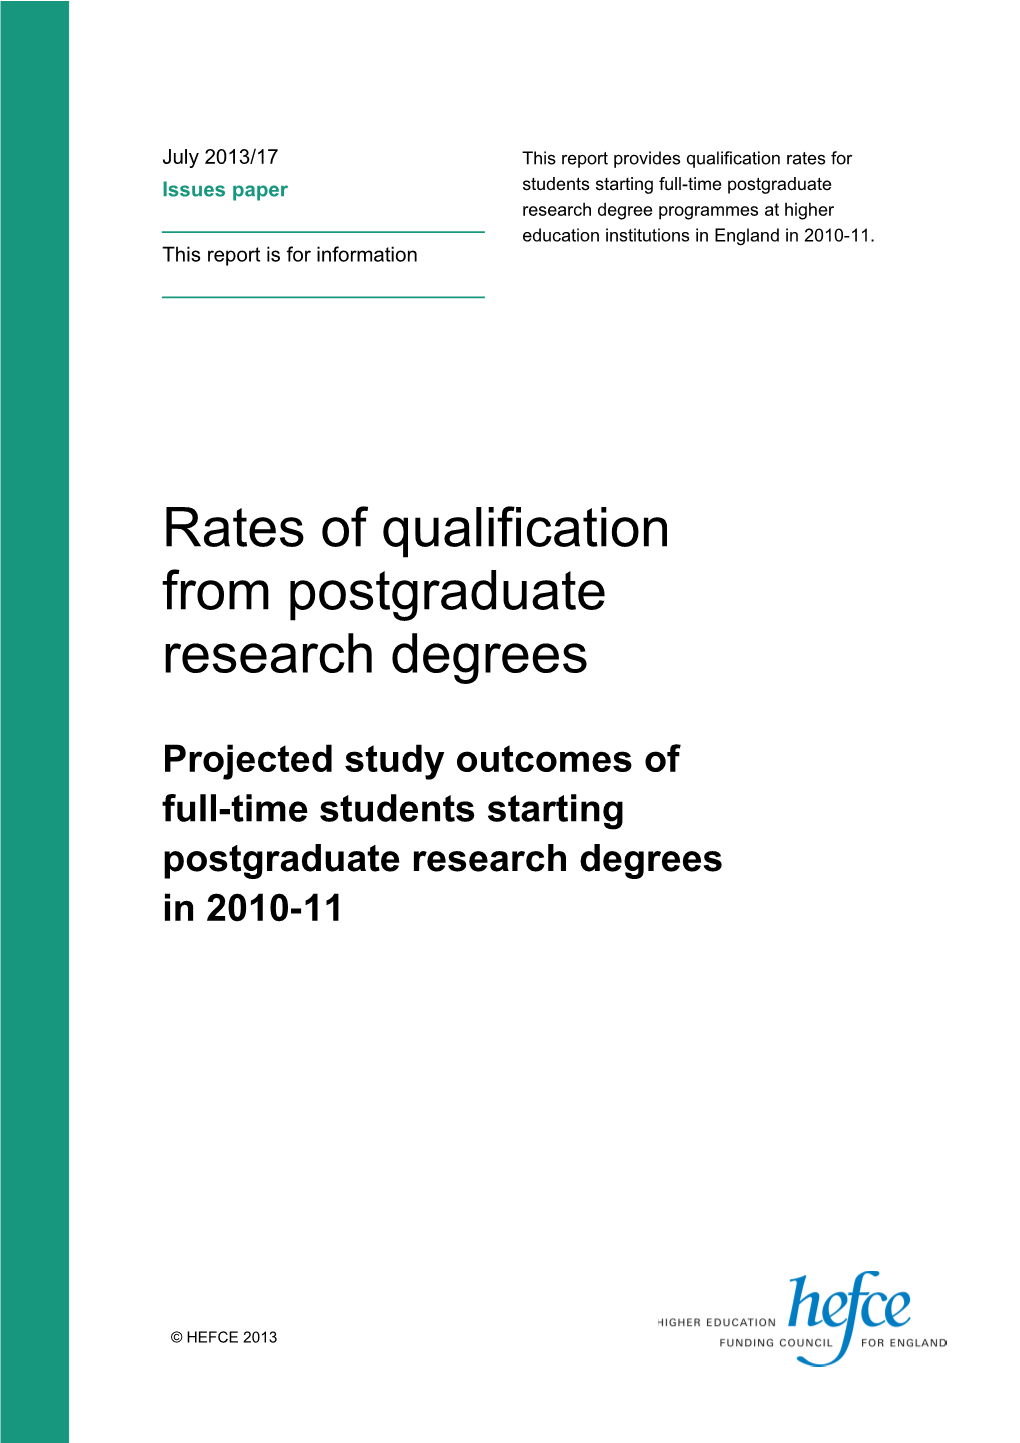 Rates of Qualification from Postgraduate Research Degreesprojected Study Outcomes of Full-Time